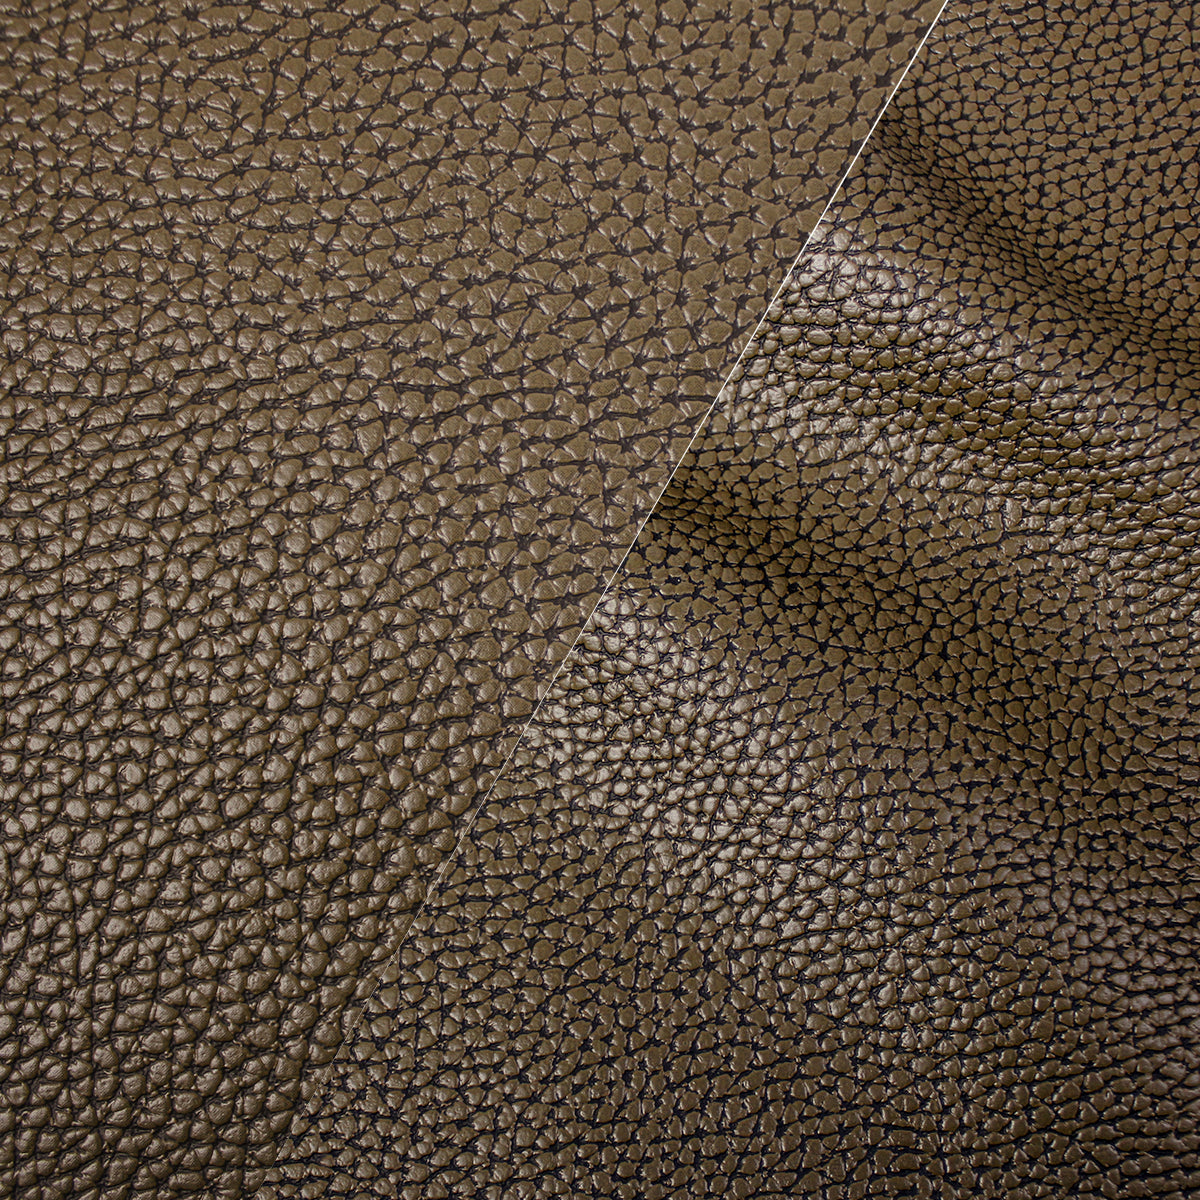 Bycast65 Brown Matte Gloss Satin Correct-Grain Pattern Faux Leather Marine Vinyl Fabric display